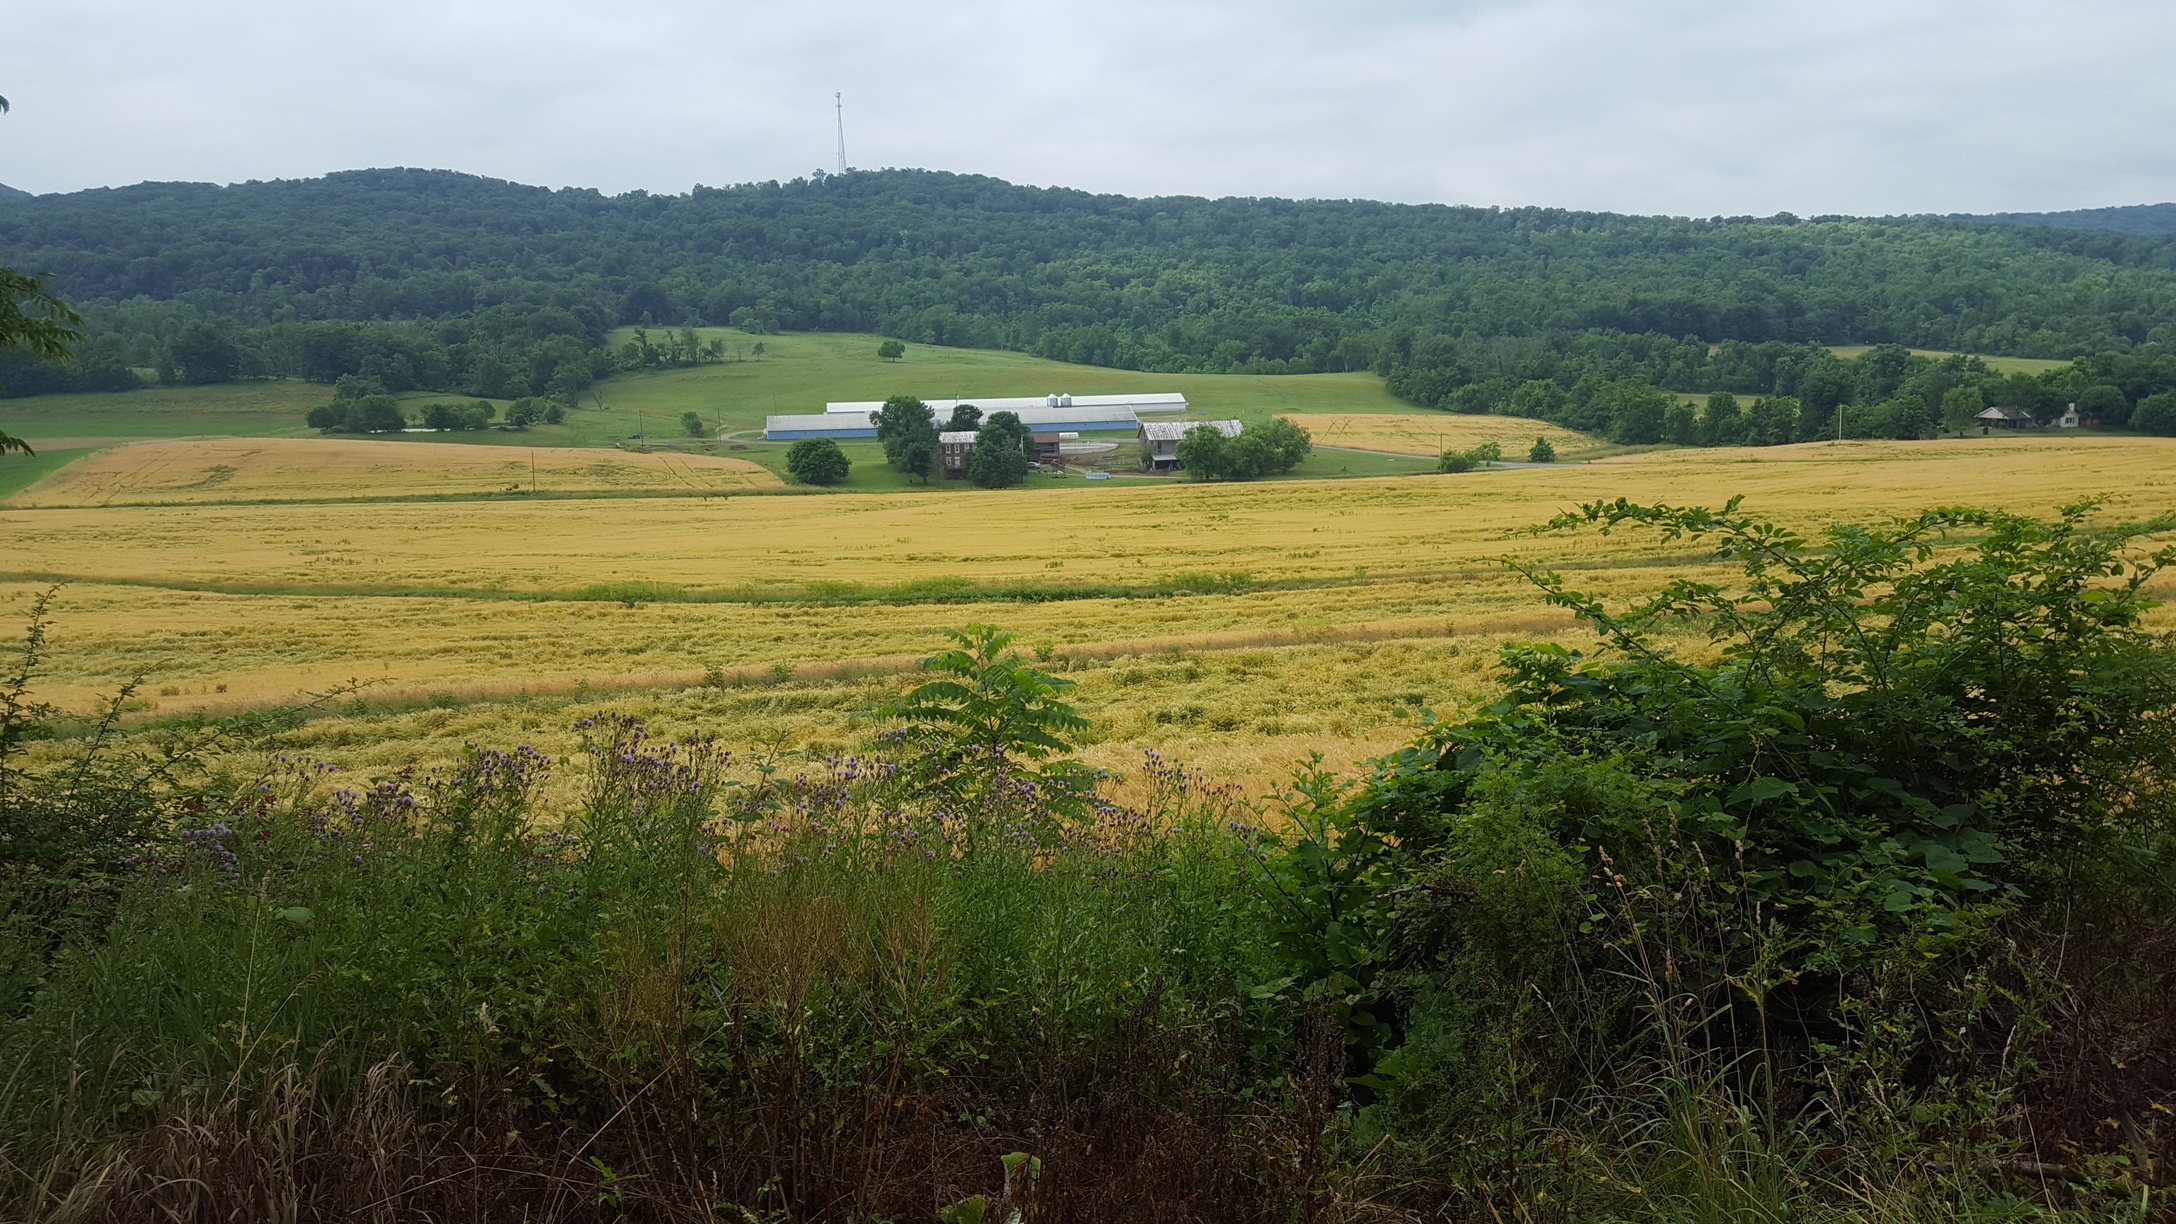 A farm in the Pfoutz Valley, Millerstown, PA